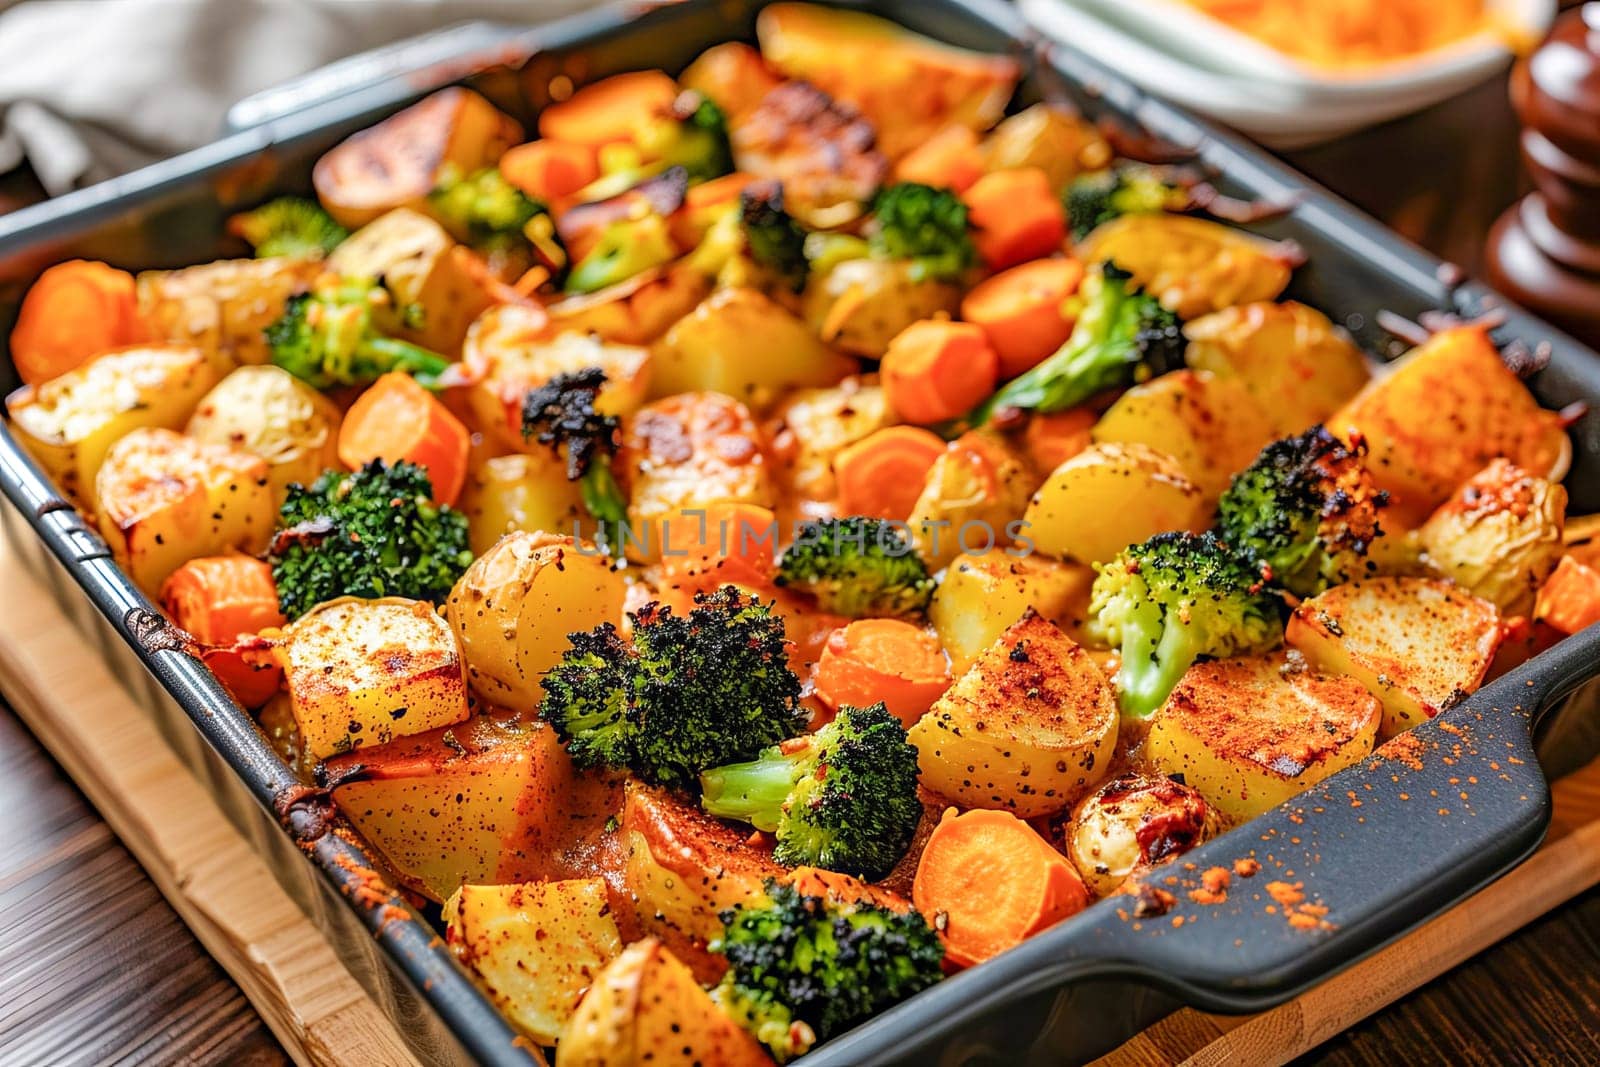 Vegetable casserole of potatoes, carrots and broccoli in a baking dish. by OlgaGubskaya